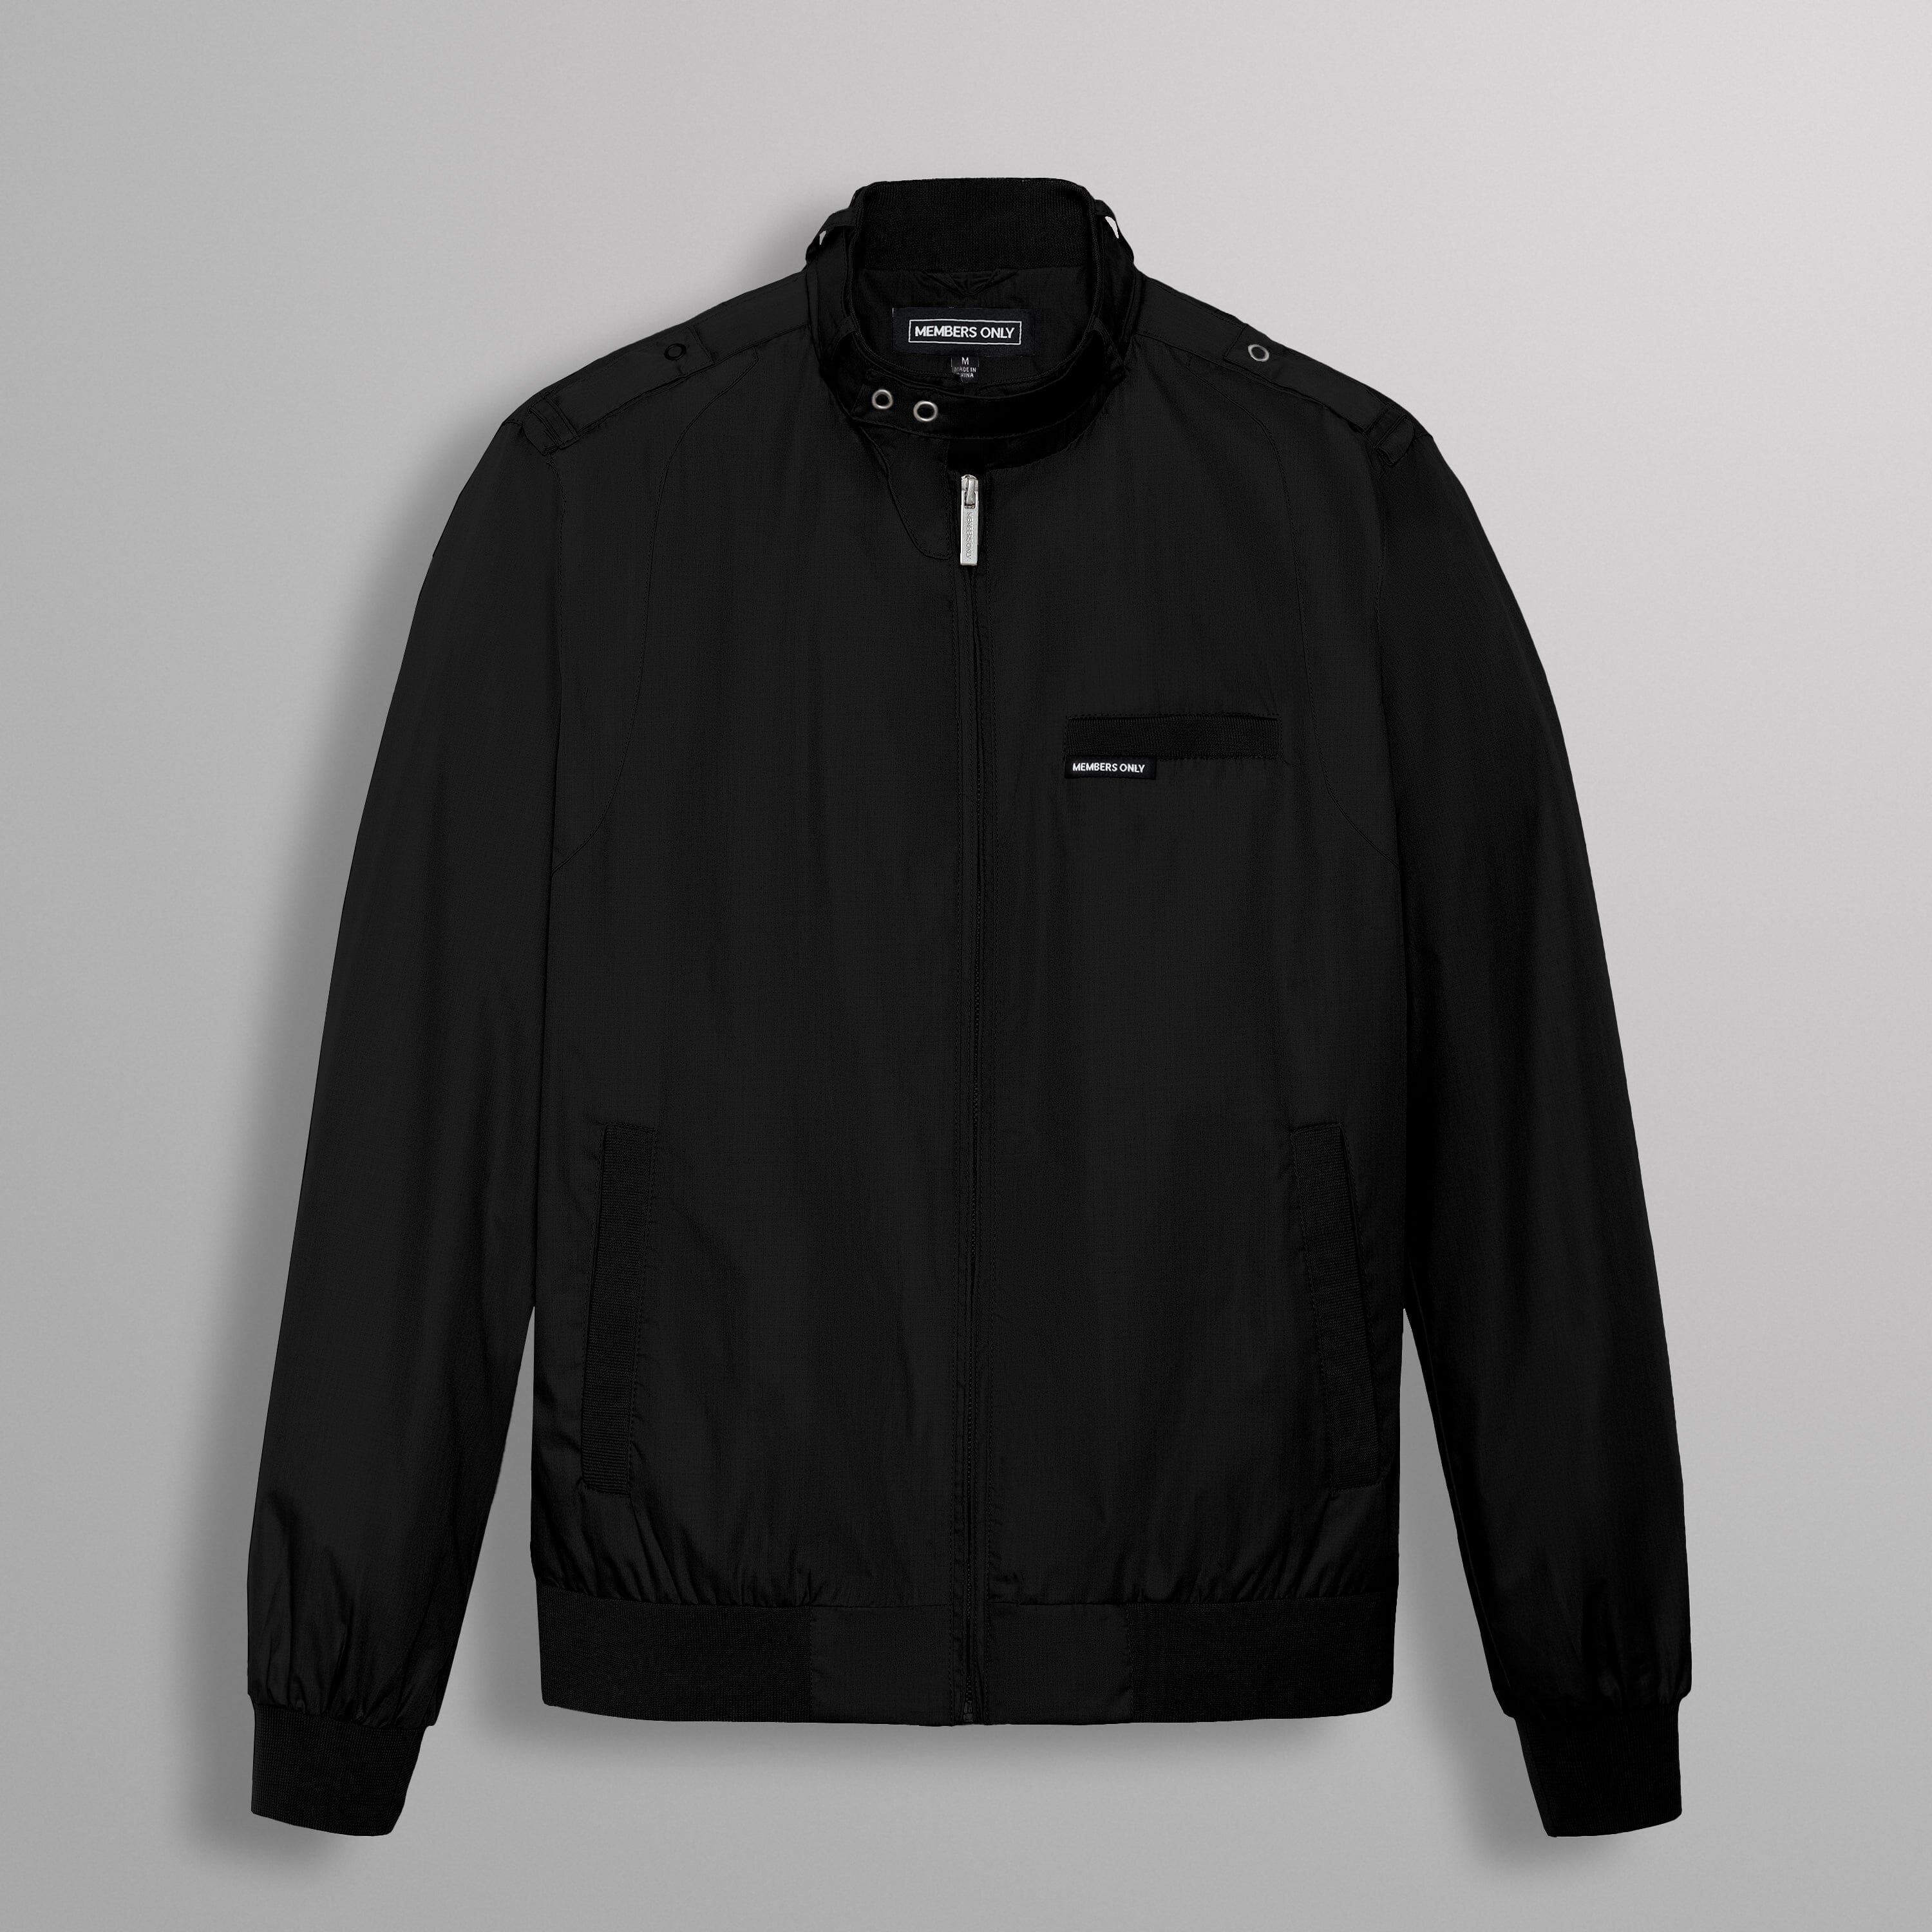 Men's Big & Tall Classic Iconic Racer Jacket